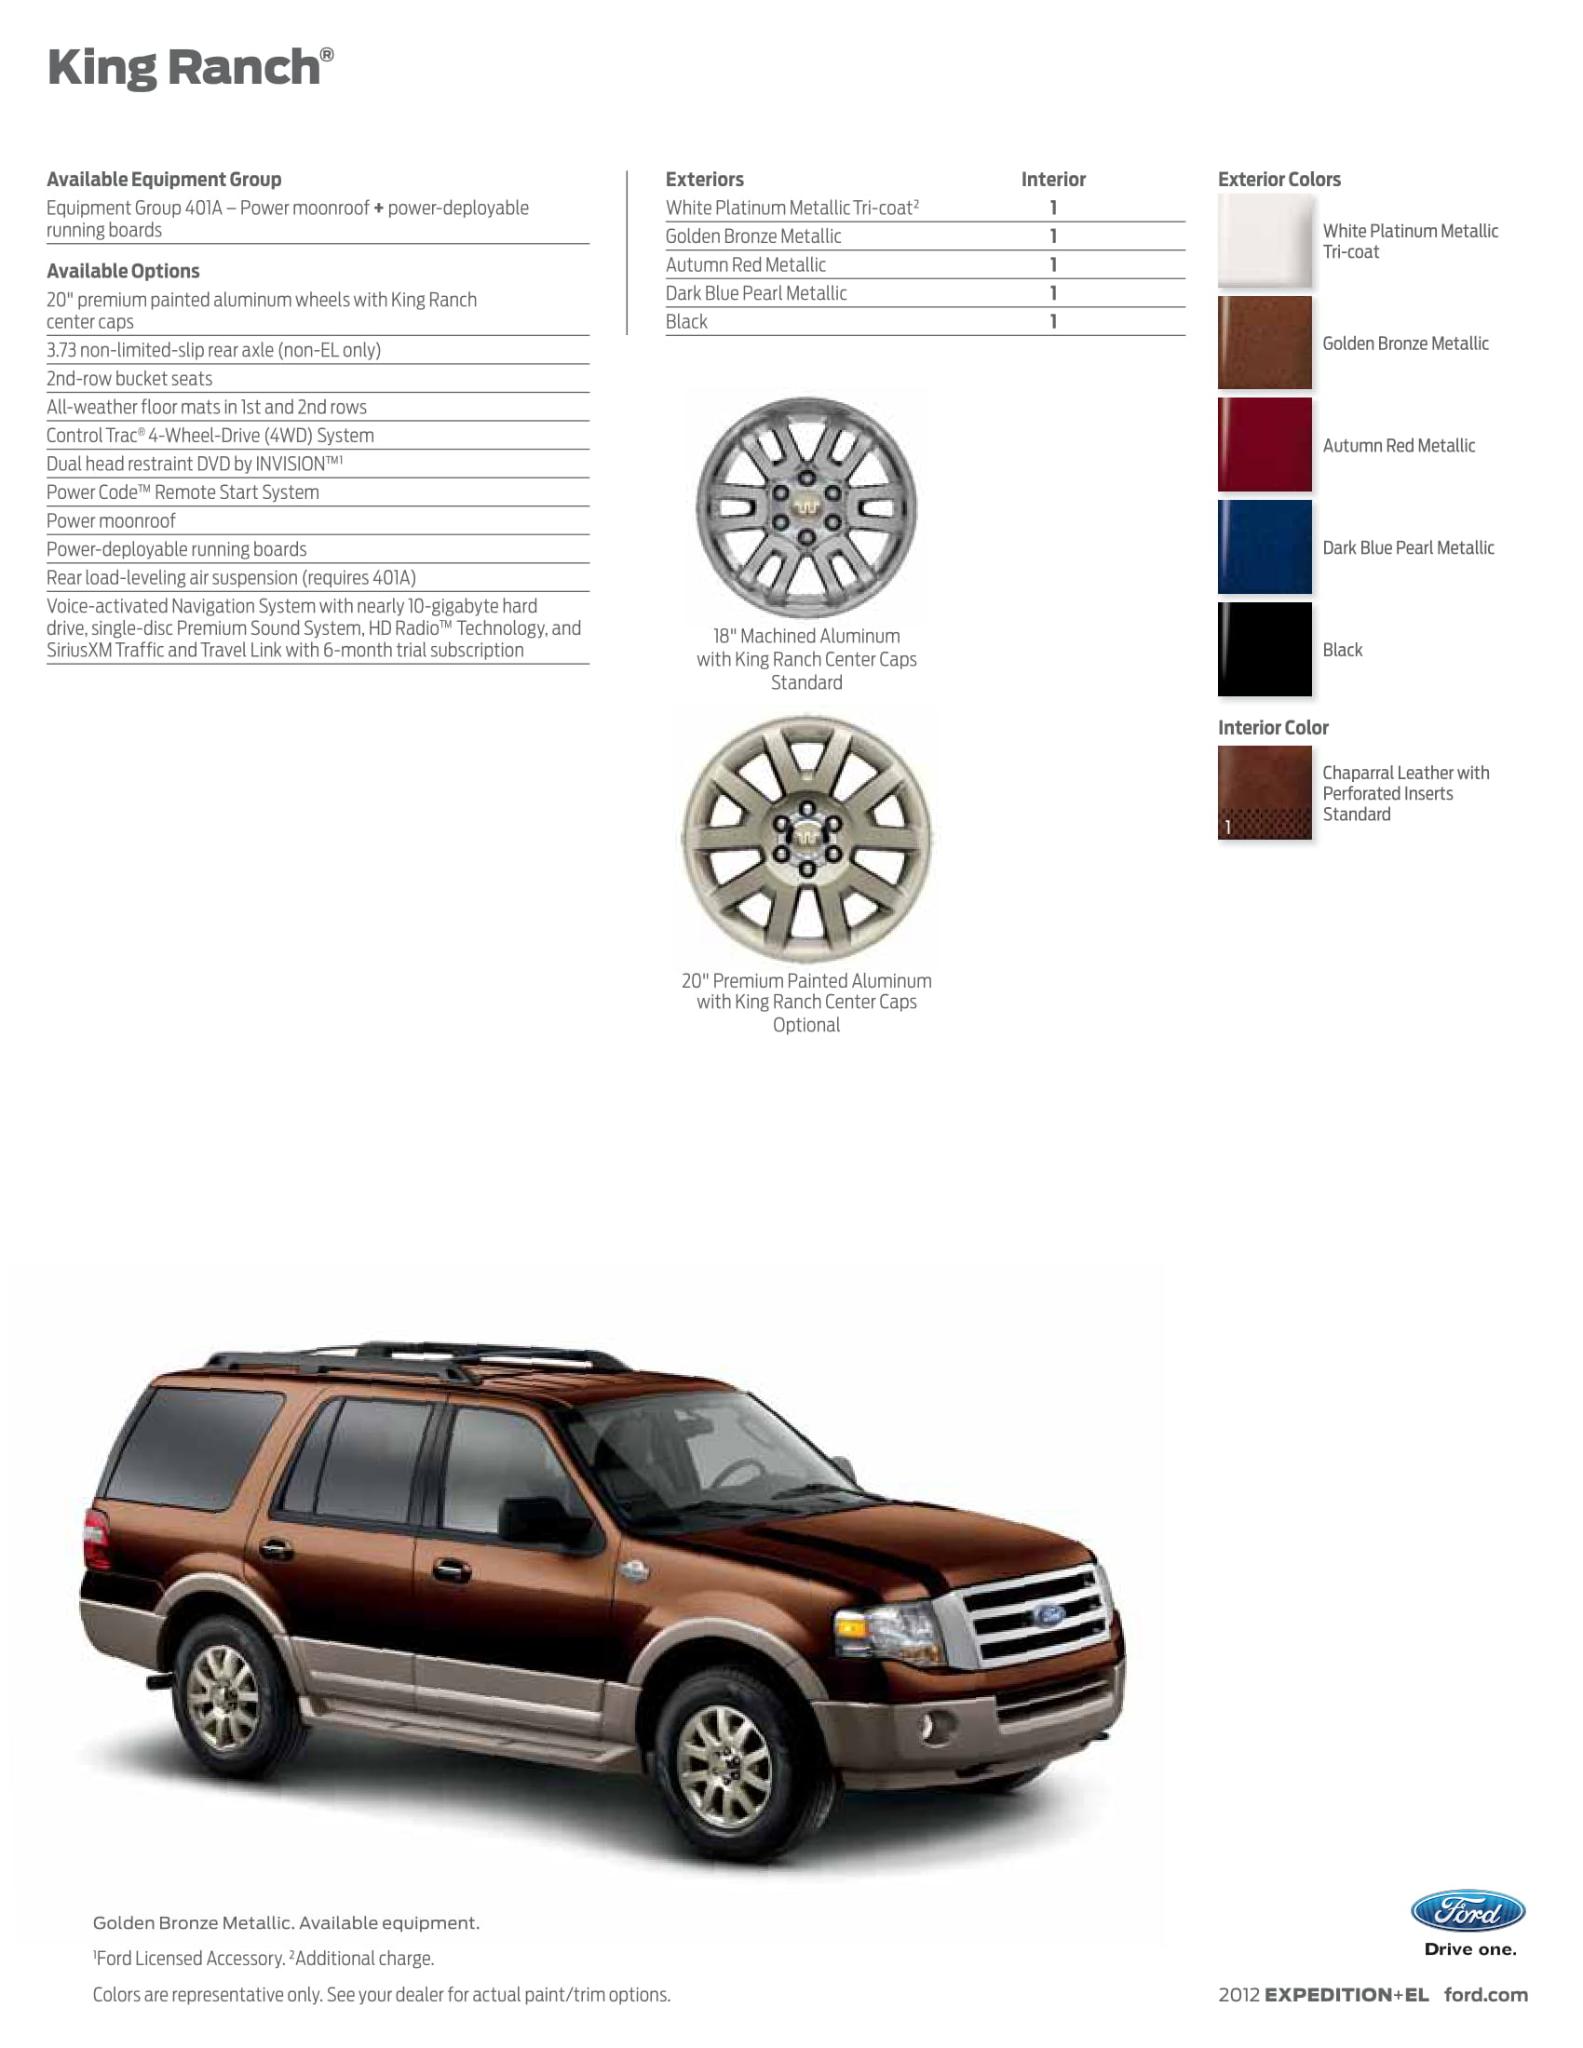 Complete Ford Expedition Paint Code History